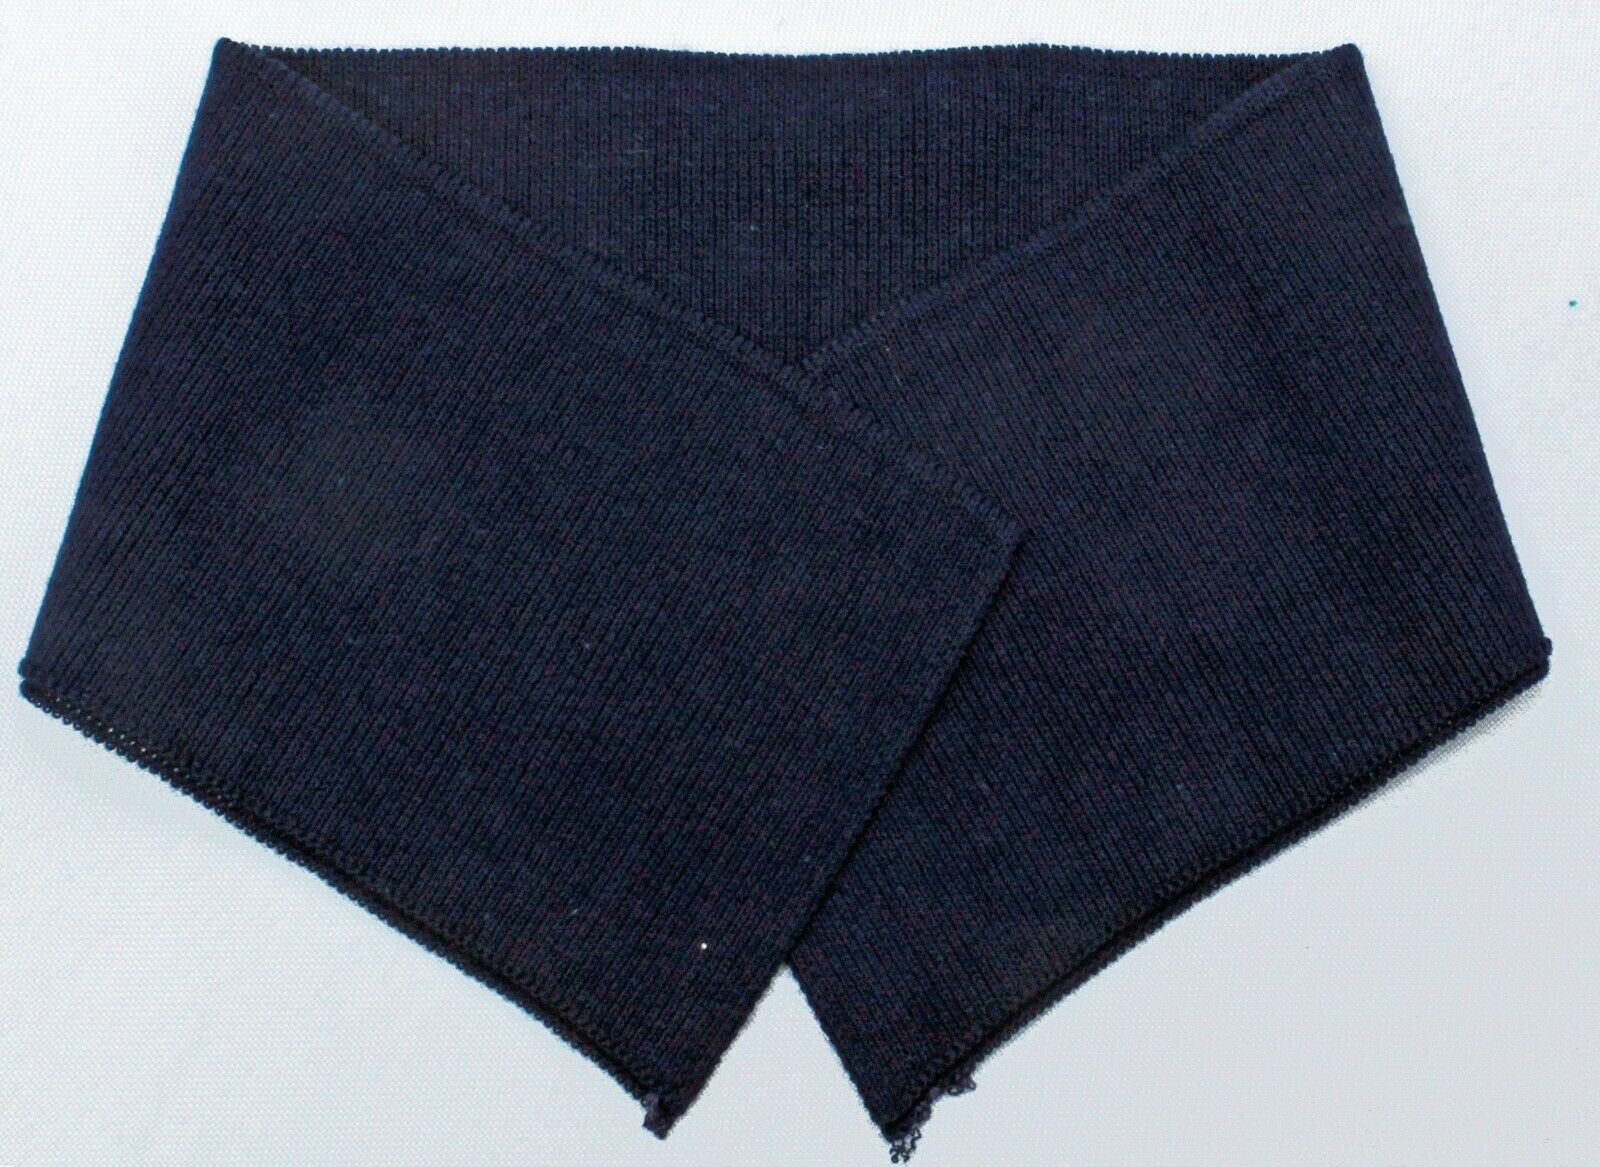 Primary image for Rugby Knit Shirt Collar Navy 3.5" x 16" Self-Finished Hemmed Ribbed Trim M516.13